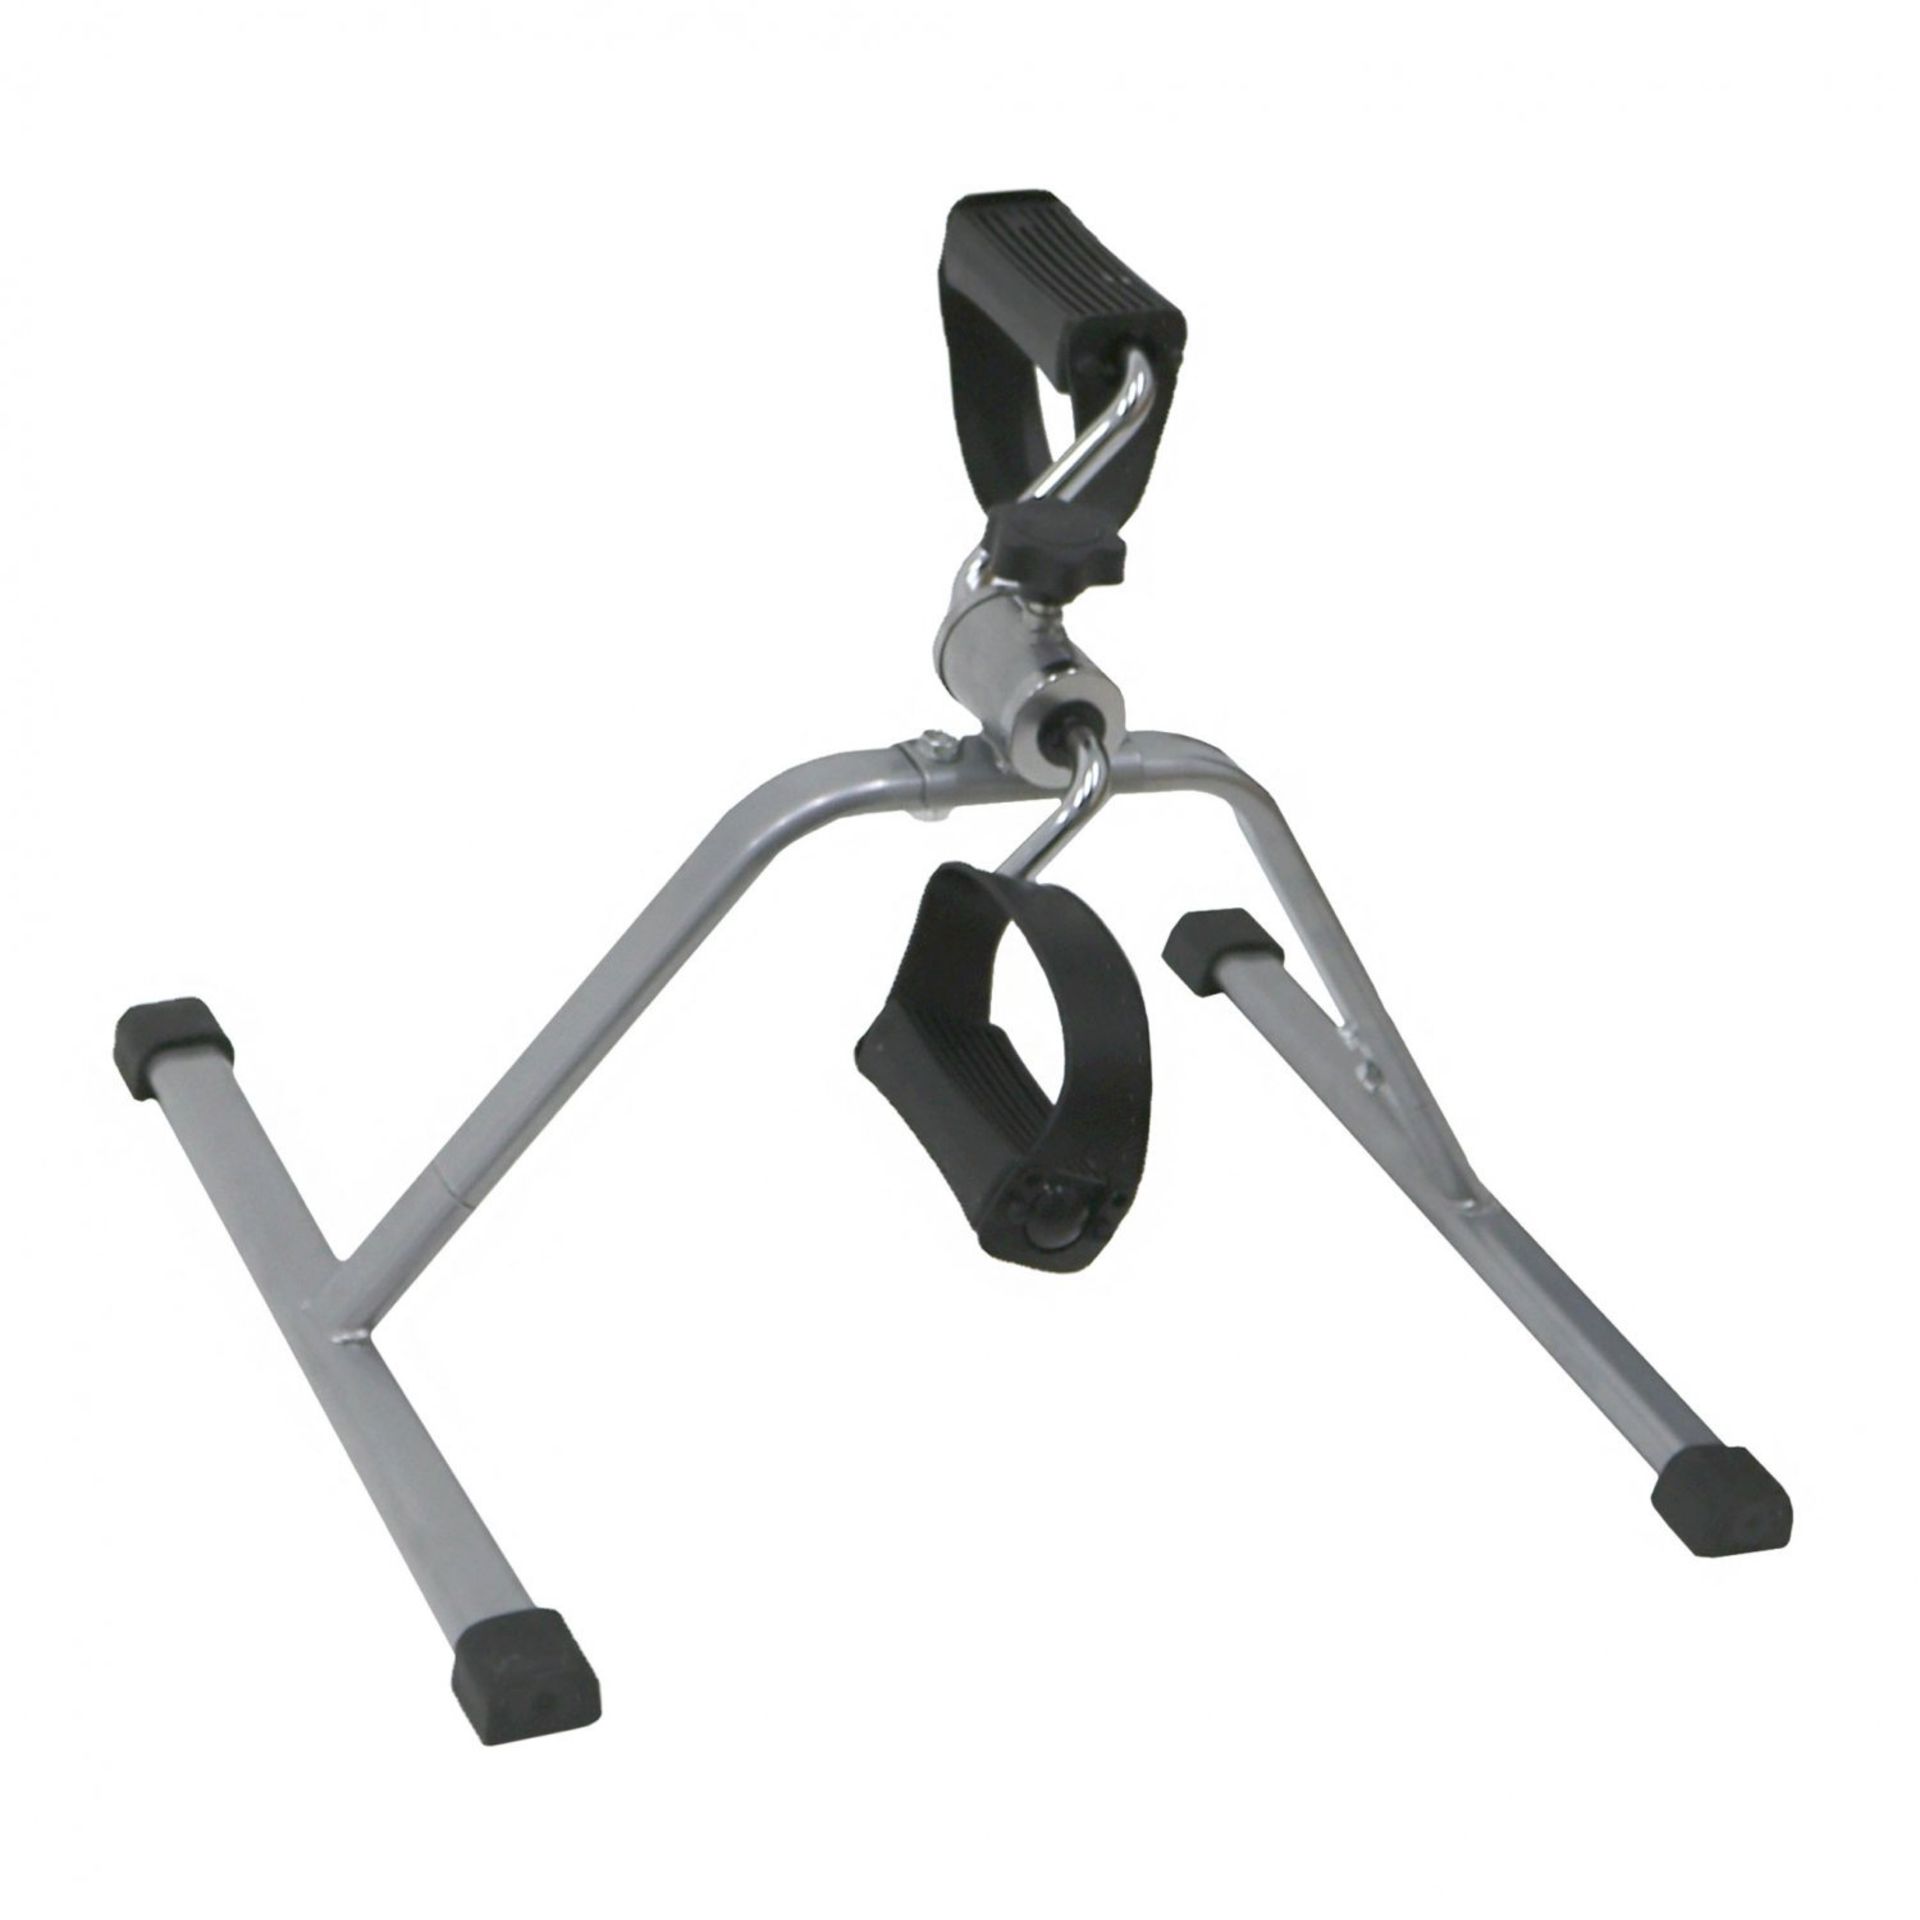 (EE543) Amazing Sofa Exercise Bike / Arm Chair Leg Exerciser Use On the Floor to Workout Leg M... - Image 2 of 4